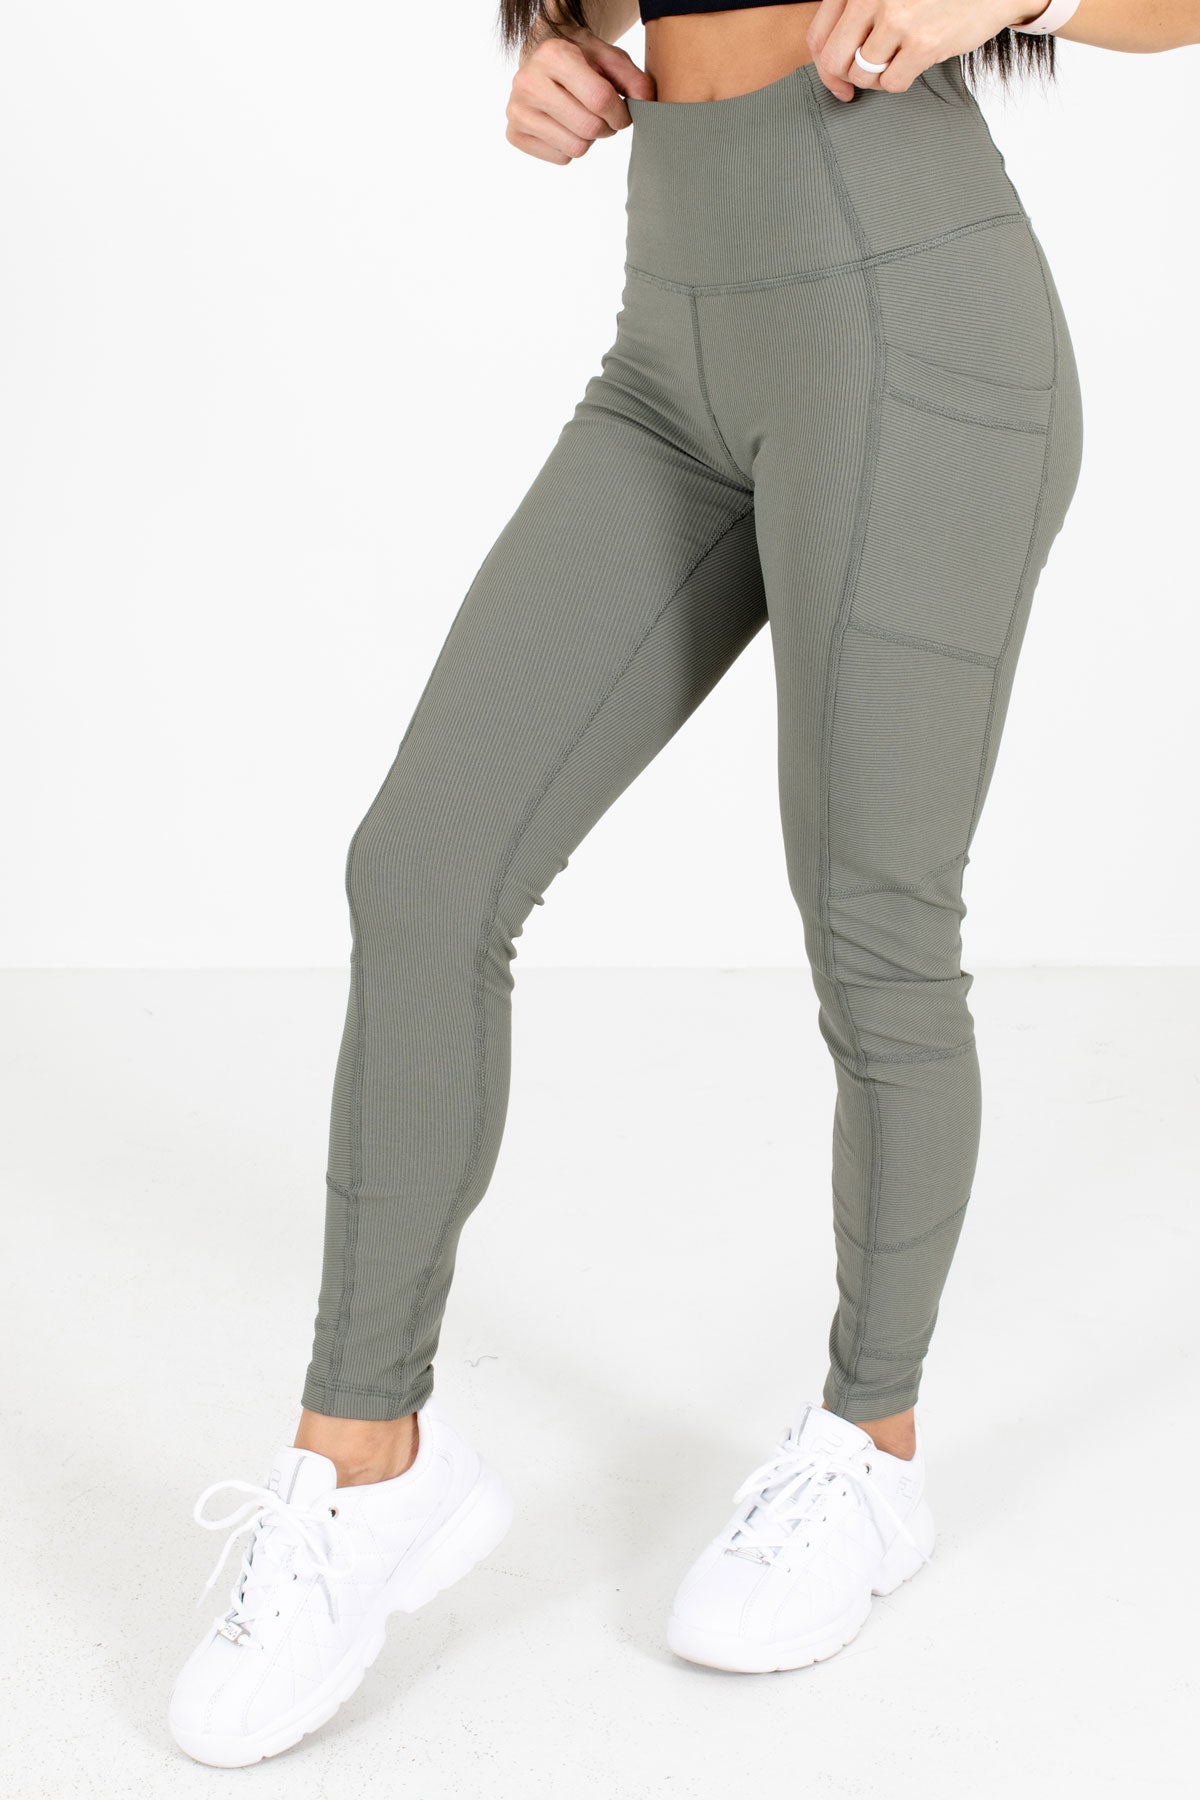 Olive Green High-Quality Ribbed Boutique Active Leggings for Women